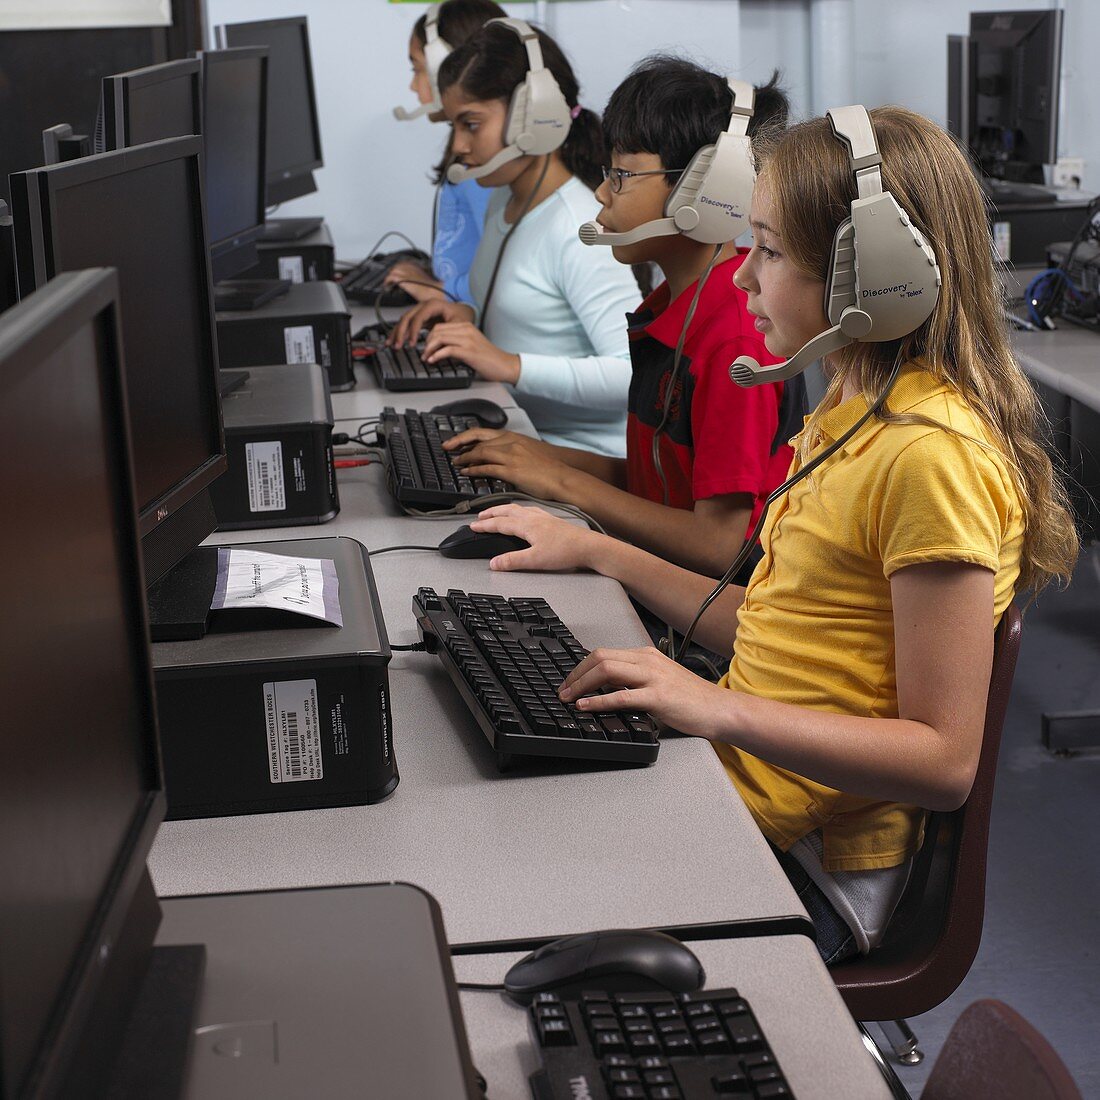 5th Grade Children Working with Computers